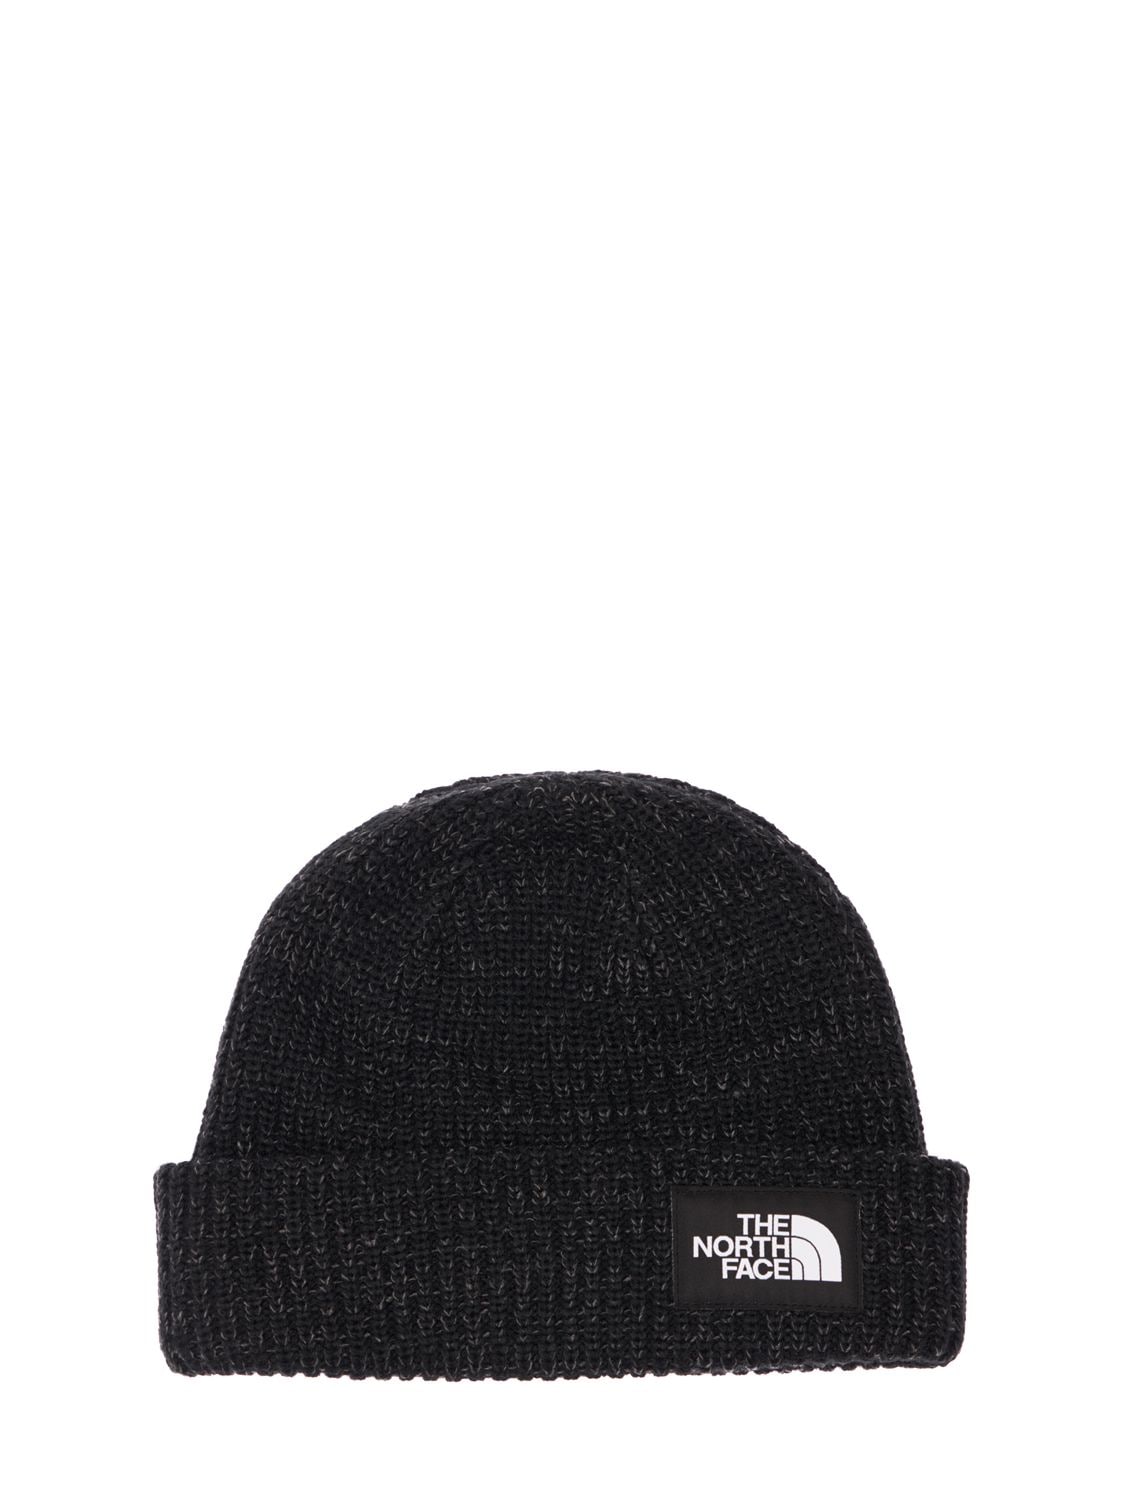 The North Face Salty Dog Beanie Hat In Black